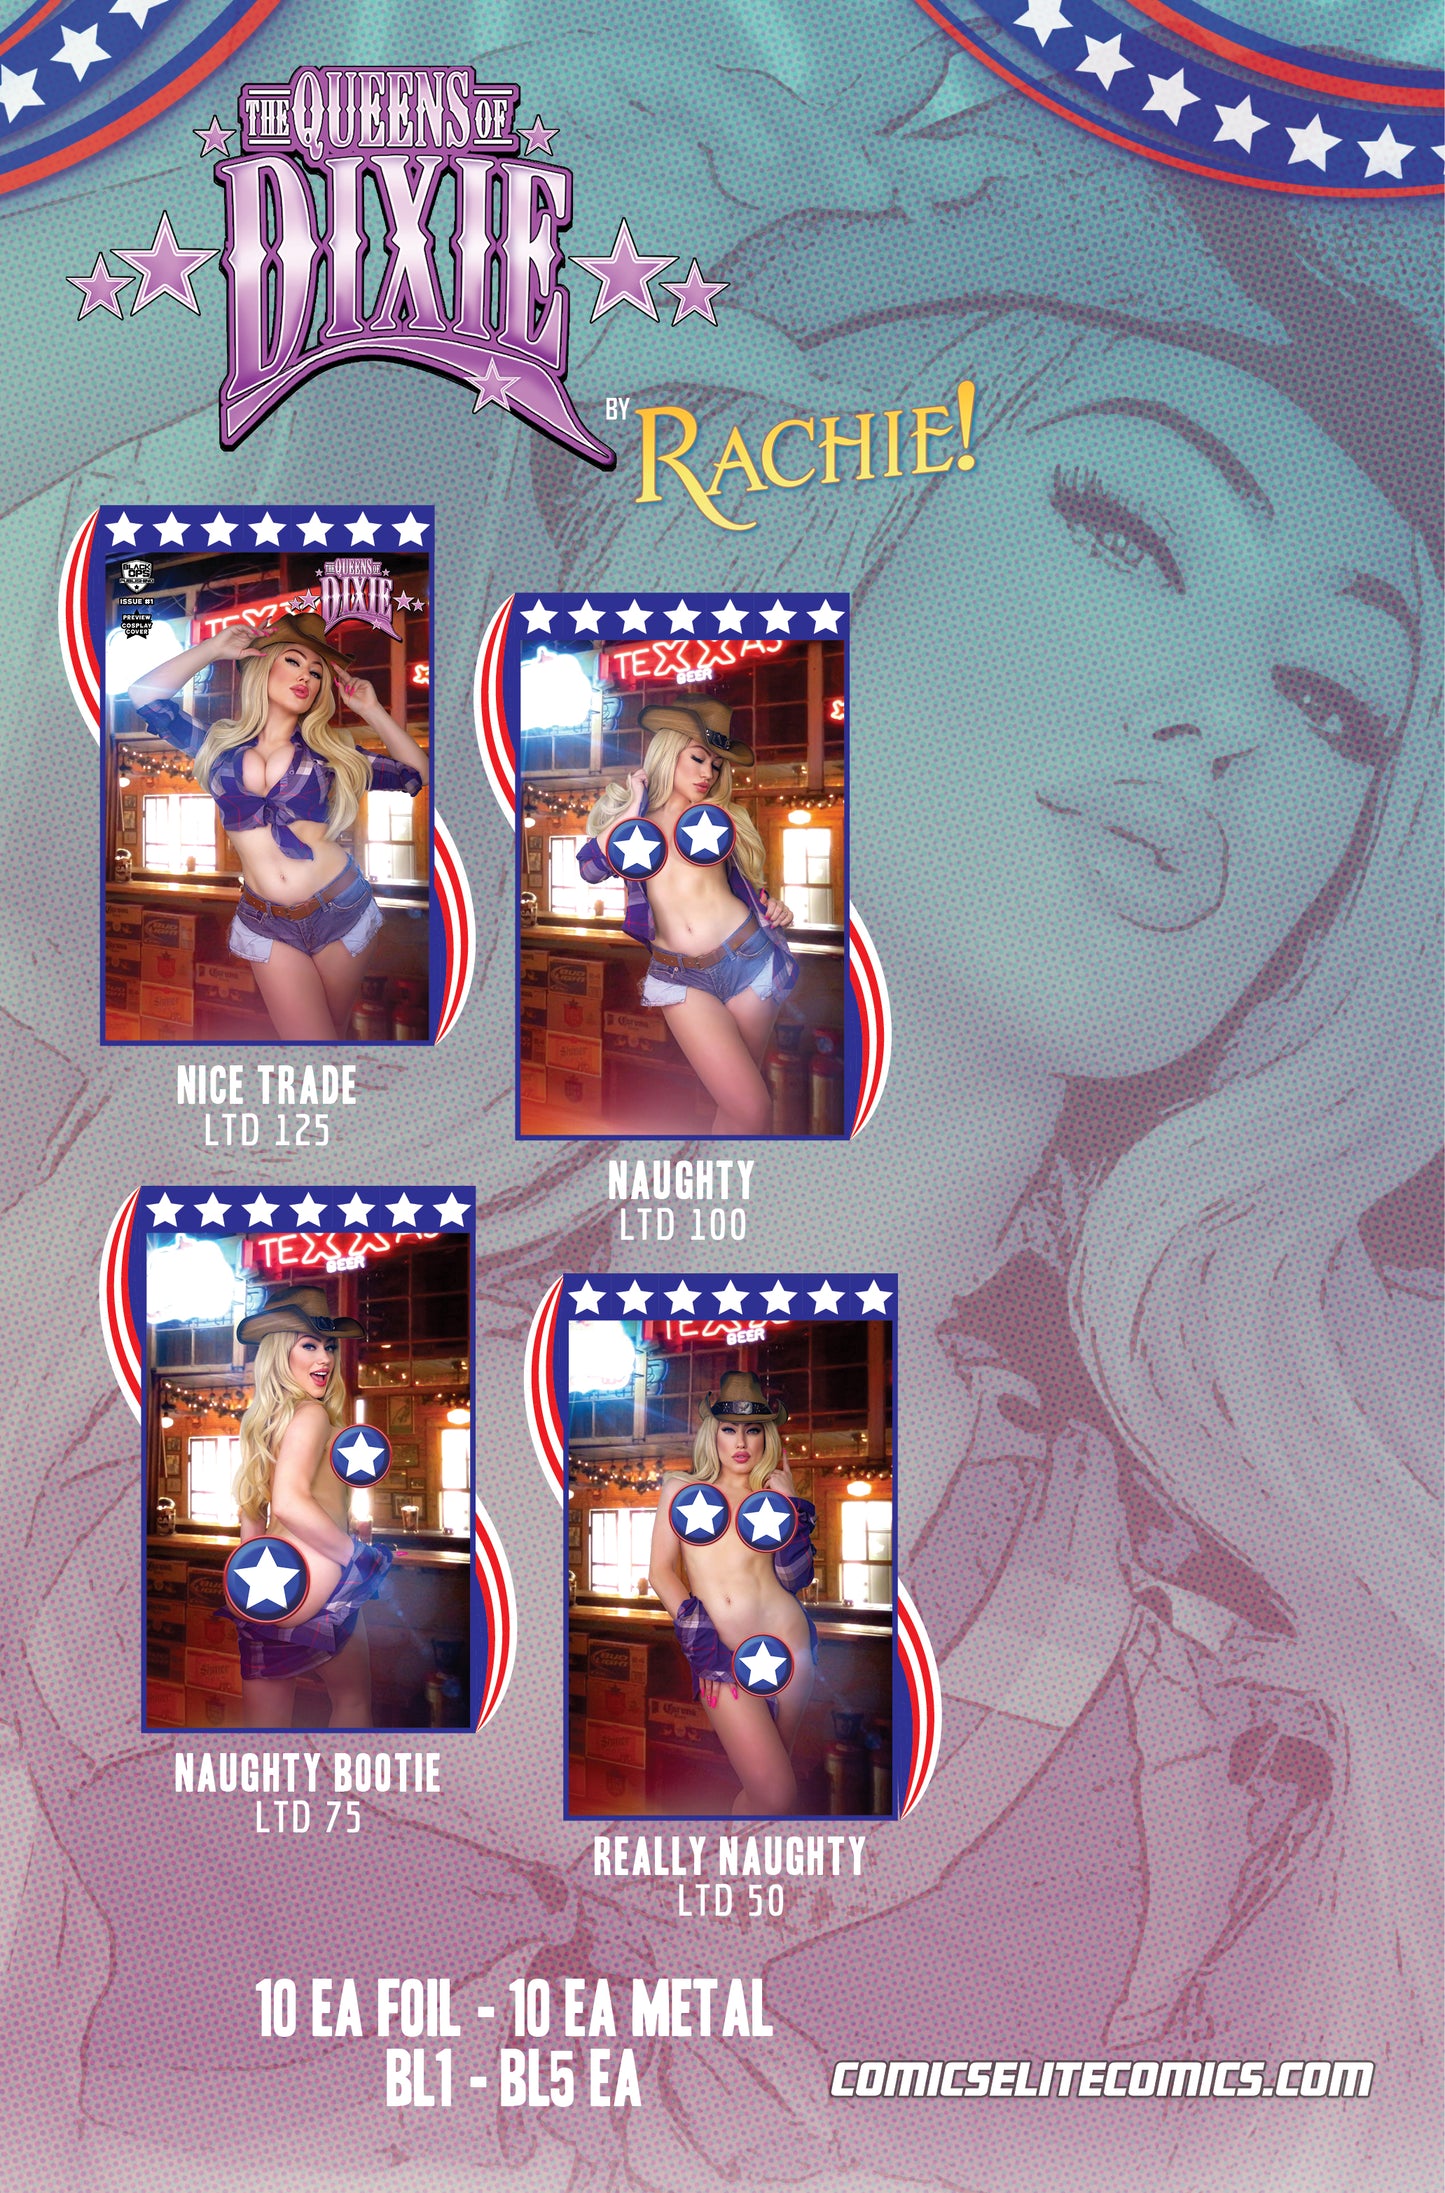 QUEENS OF DIXIE #1 PREVIEW - FACES BY RACHIE - NAUGHTY FOIL LTD 10